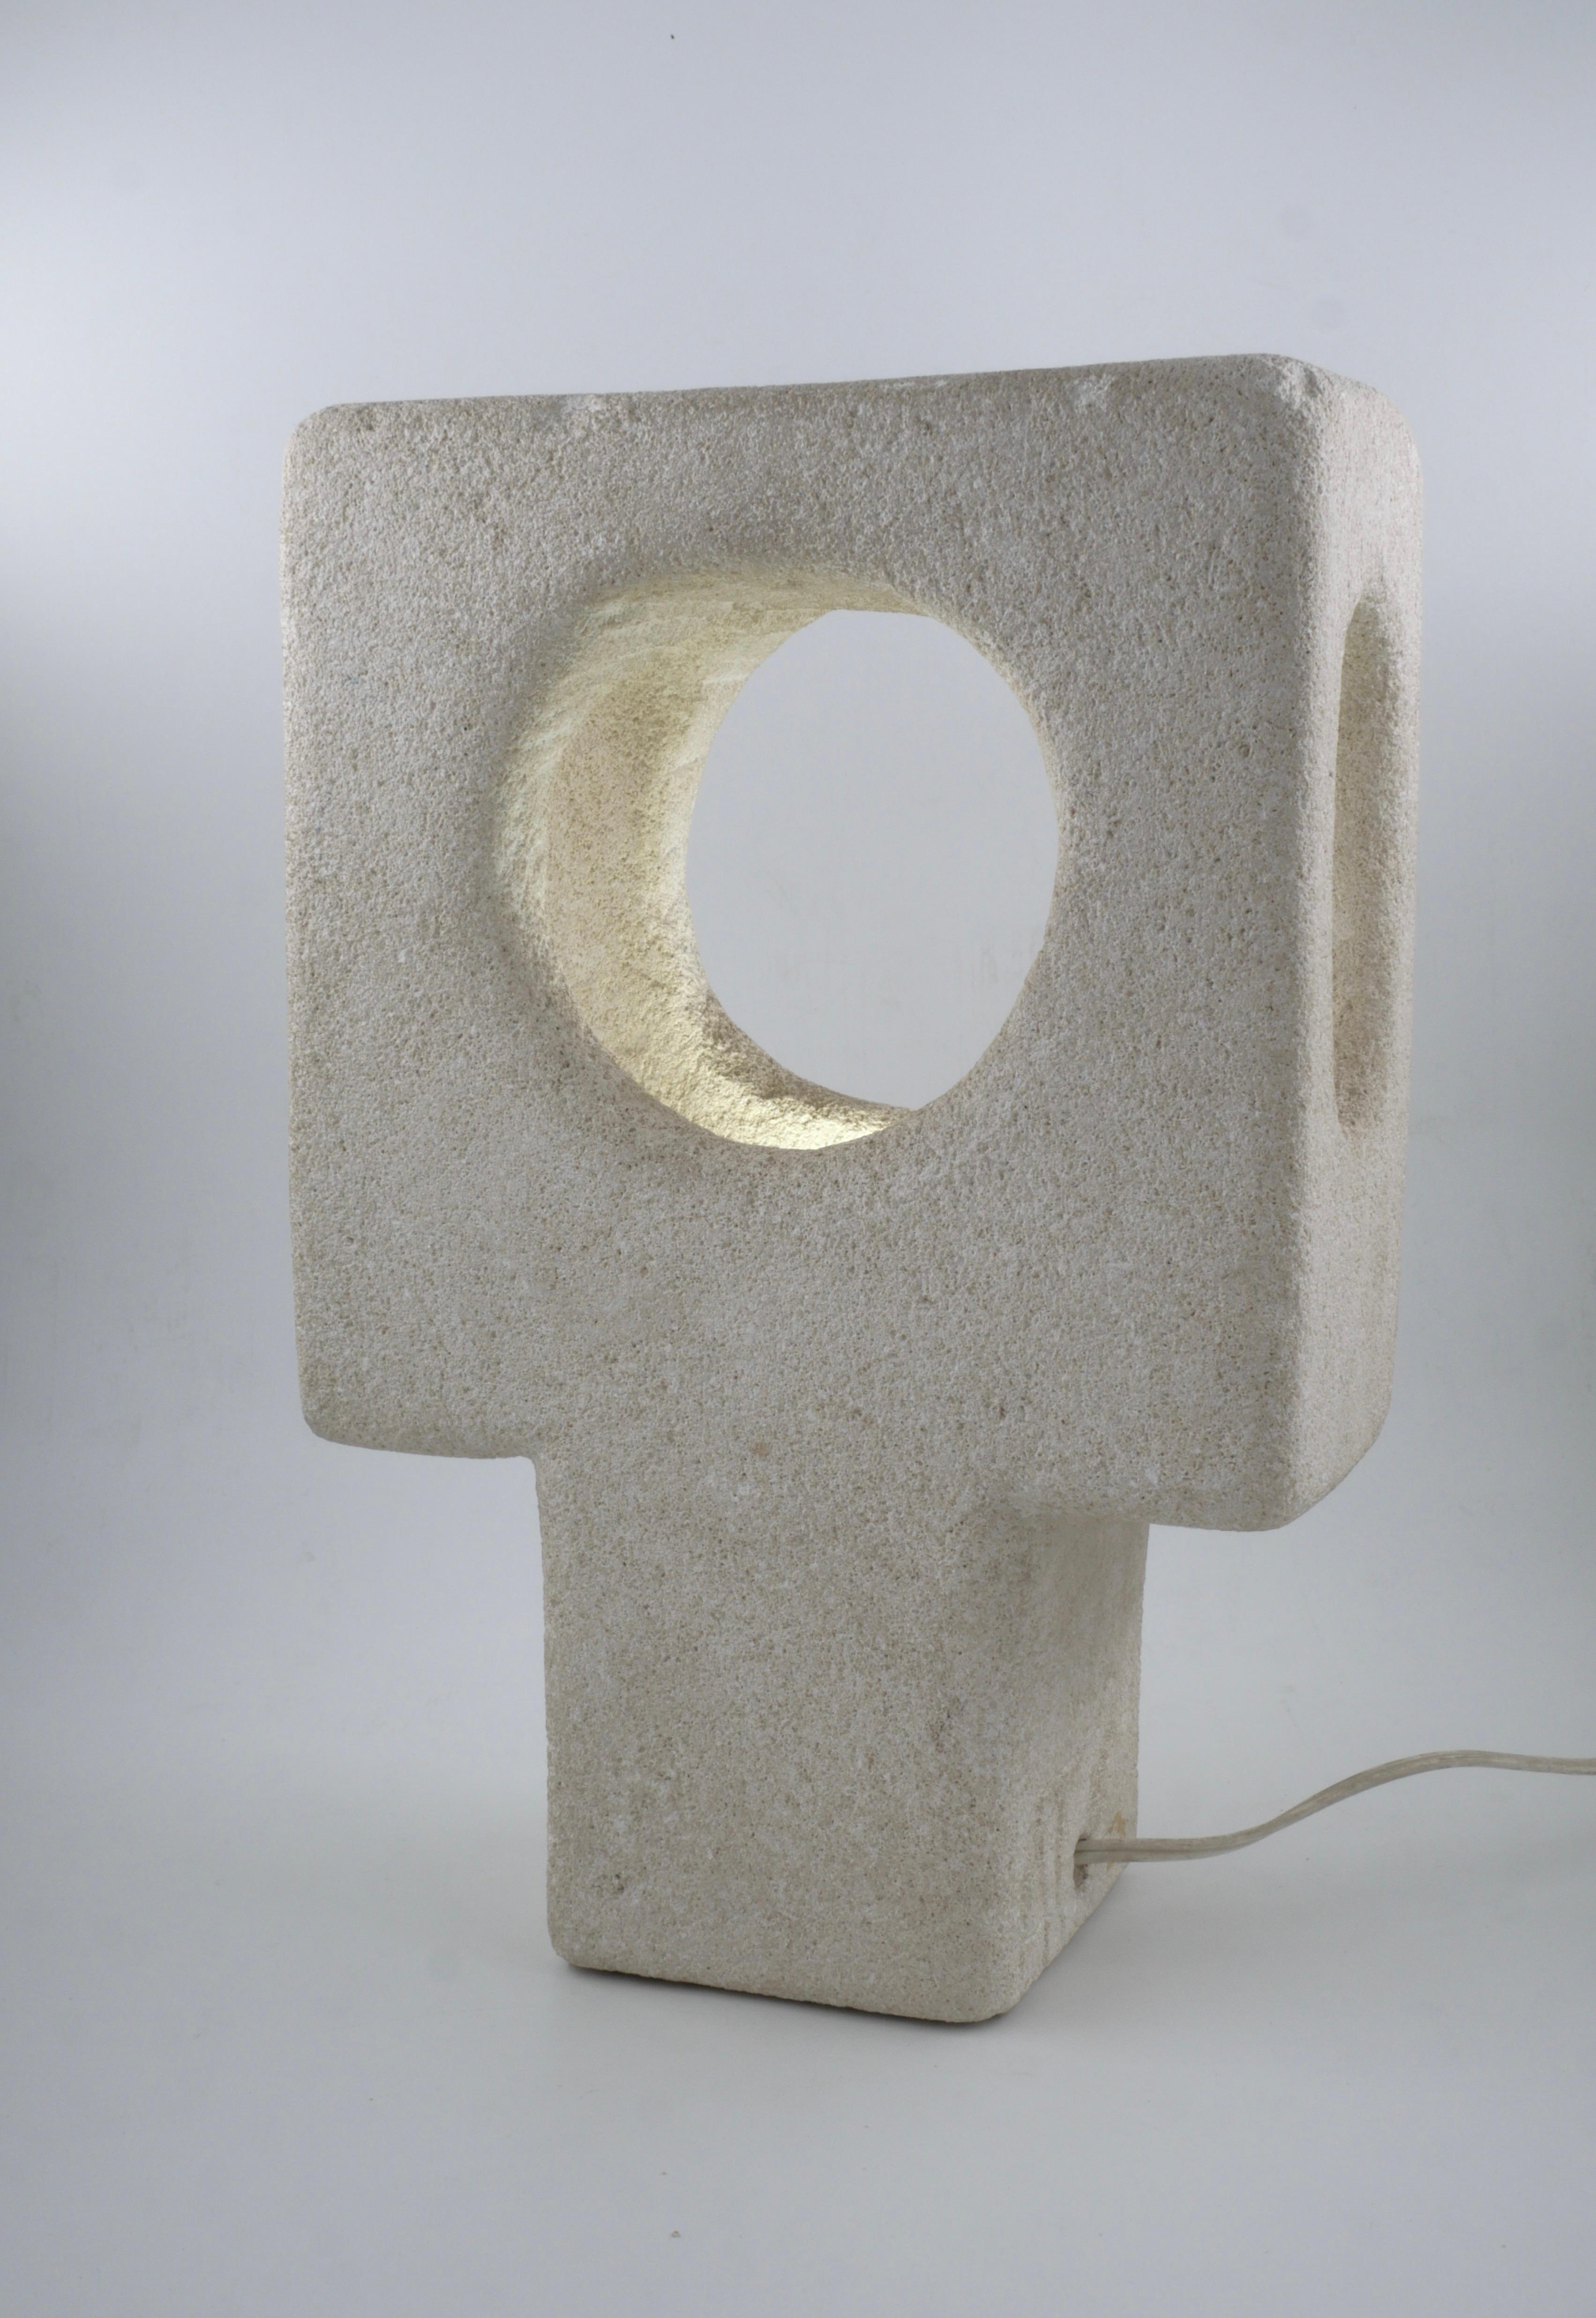 Sculpture lamp made by Albert Tormos in the early 70's. The lamp is carved in the Luberon stone that was found near Saint Tropez where the workshop of Albert Tormos was located.
This sculpture benefits from a double sign of authentication: AT